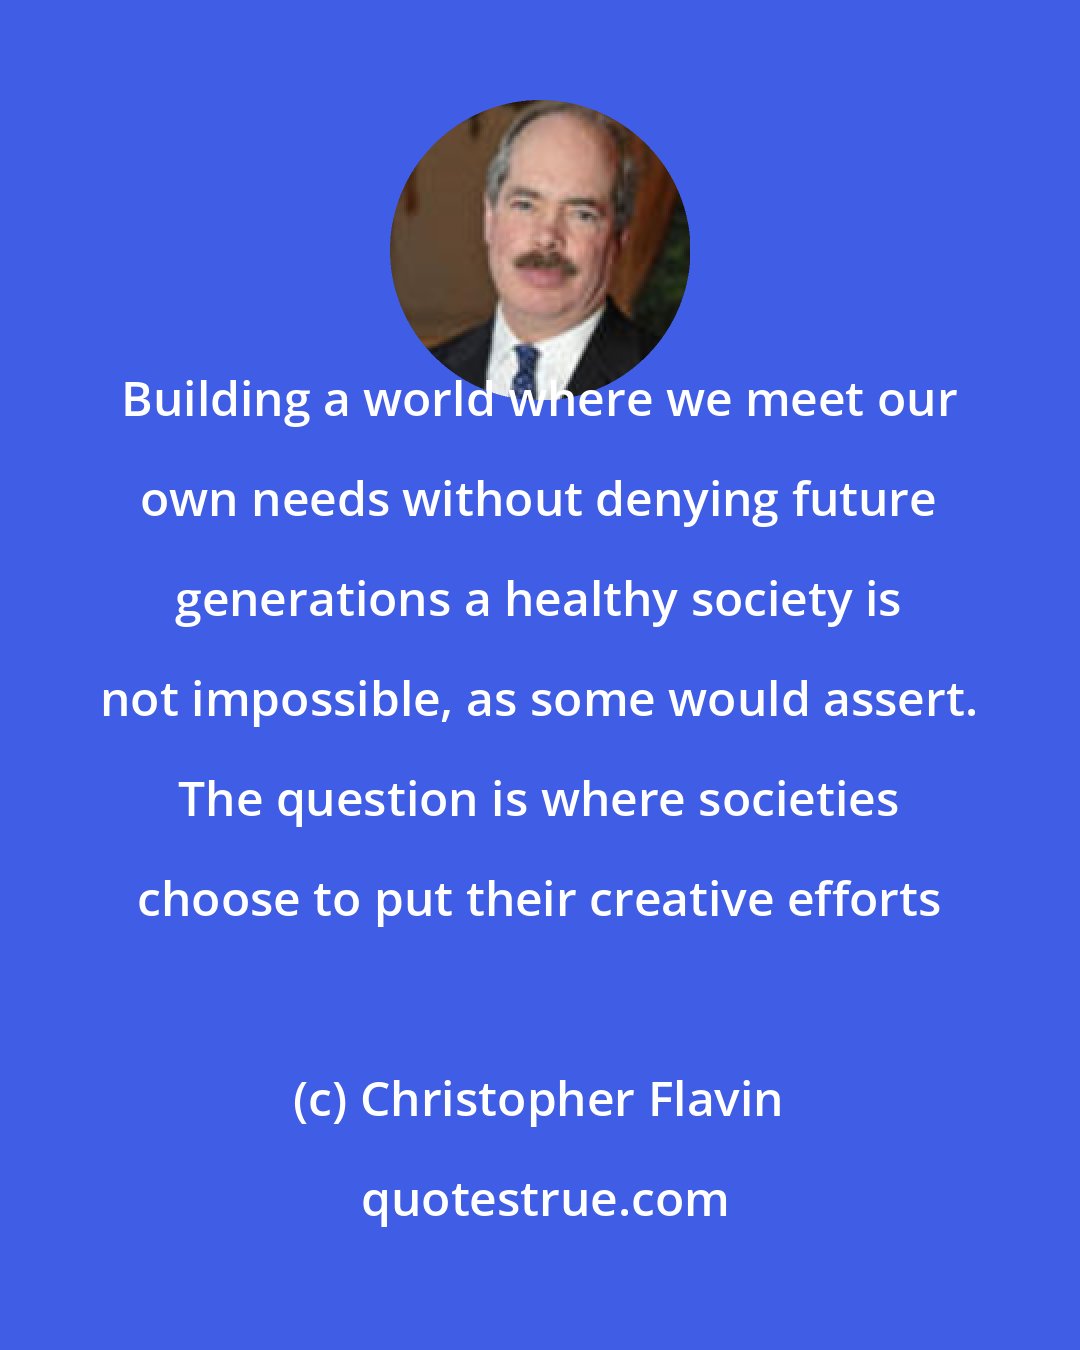 Christopher Flavin: Building a world where we meet our own needs without denying future generations a healthy society is not impossible, as some would assert. The question is where societies choose to put their creative efforts